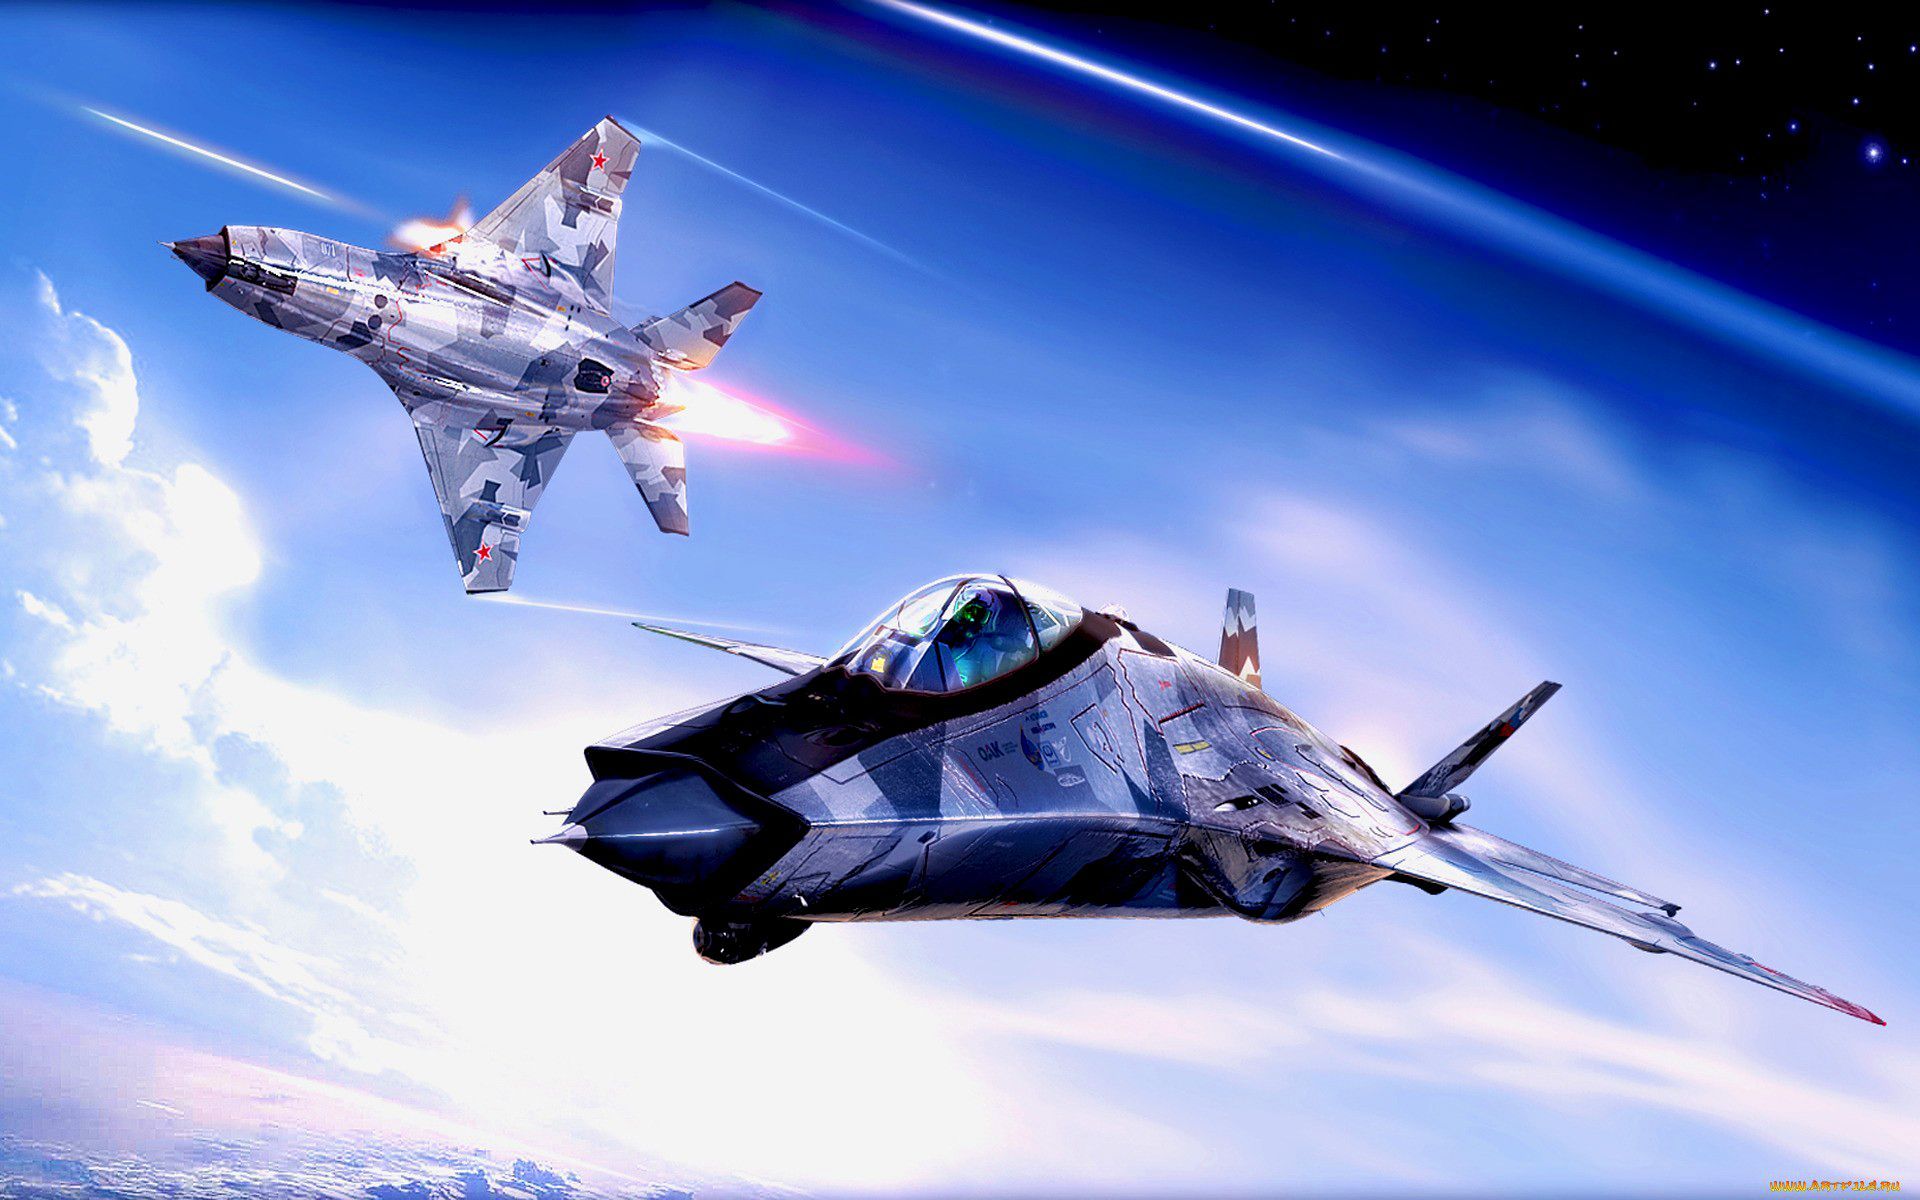 Cool Wallpapers transport, fantasy, universe, airplanes, weapon, blue